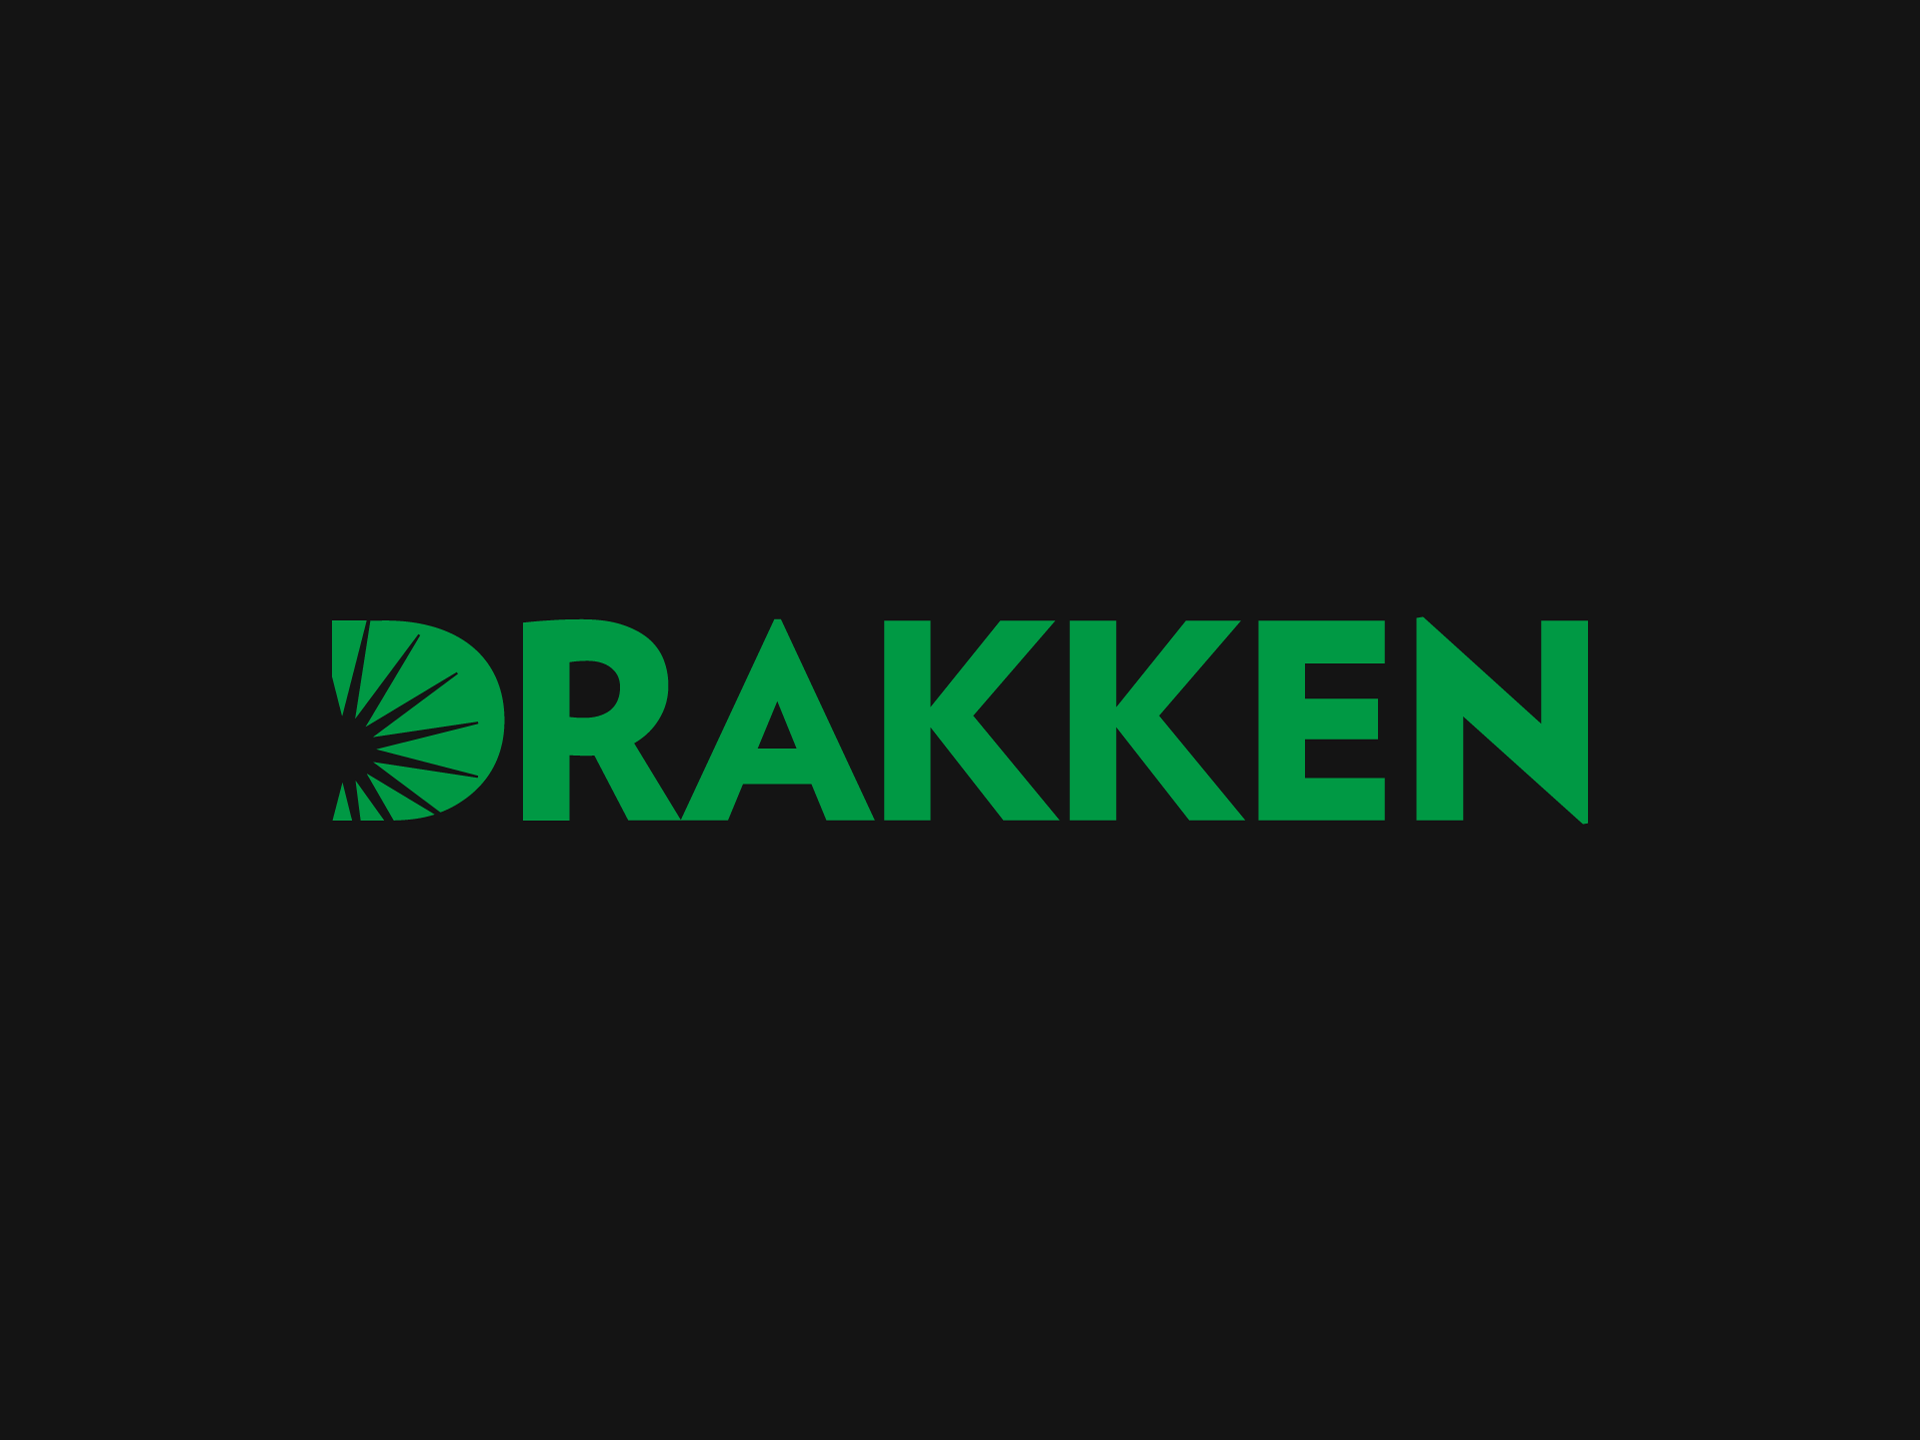 Drakken Partners with CarbonAi in Greenhouse Gas Reduction Projects